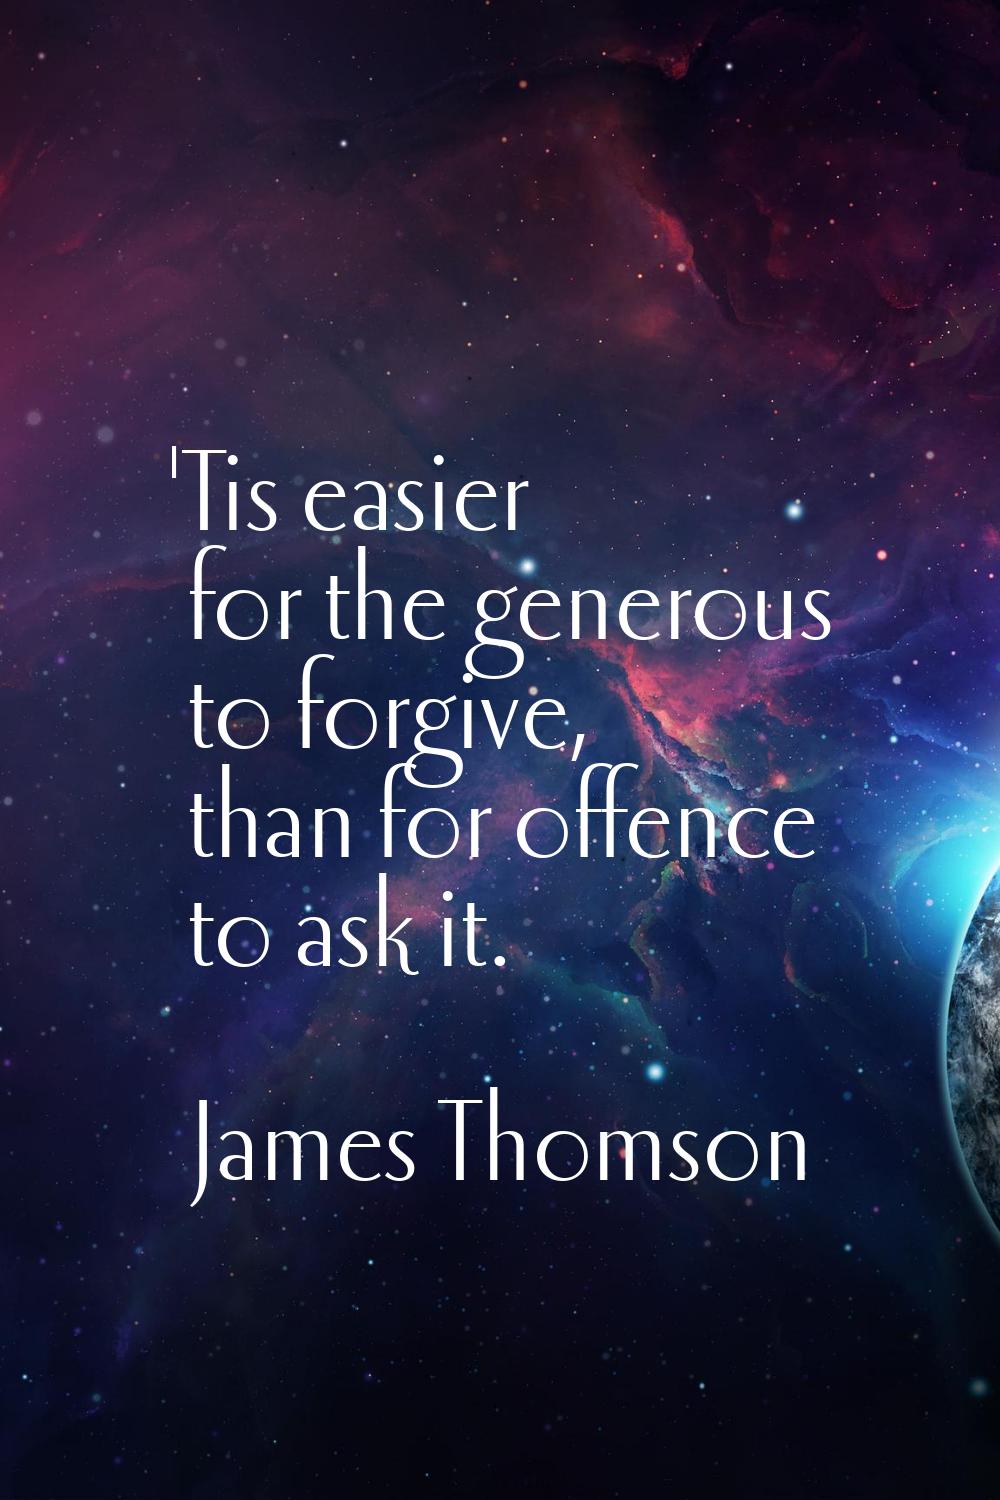 'Tis easier for the generous to forgive, than for offence to ask it.